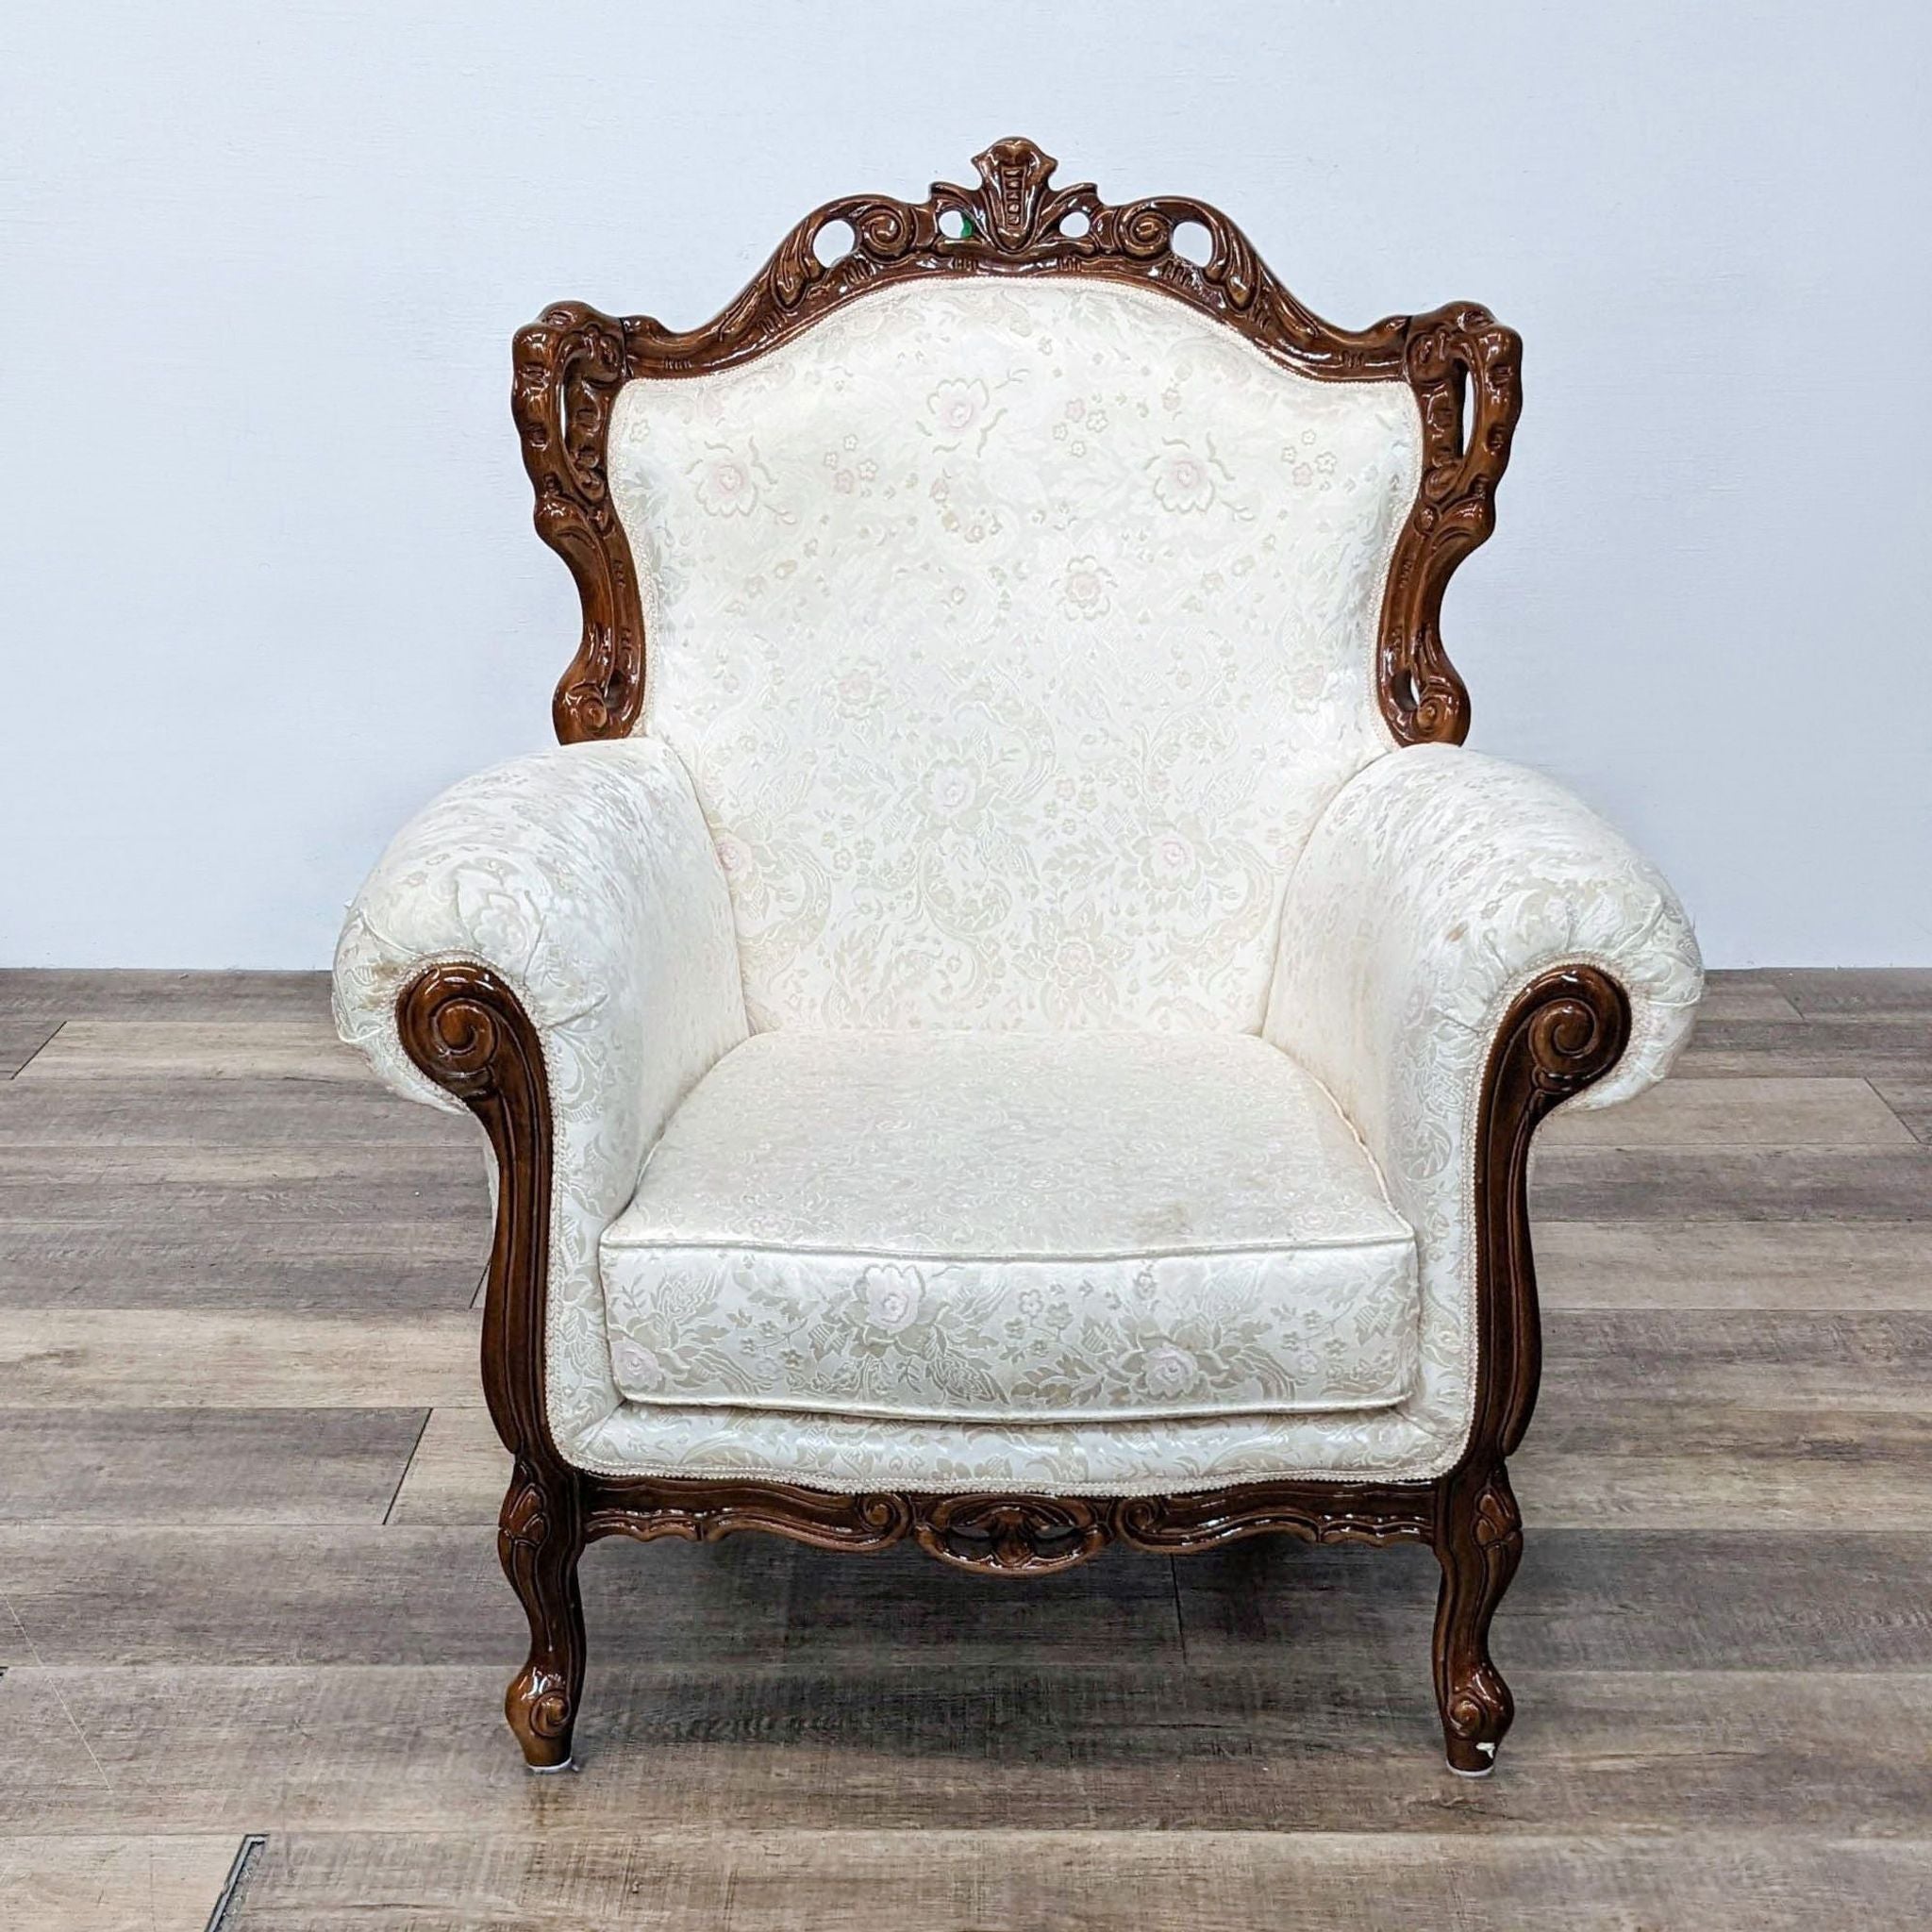 1. Reperch vintage style armchair with cream embossed upholstery and dark wooden ornate frame on a wooden floor.